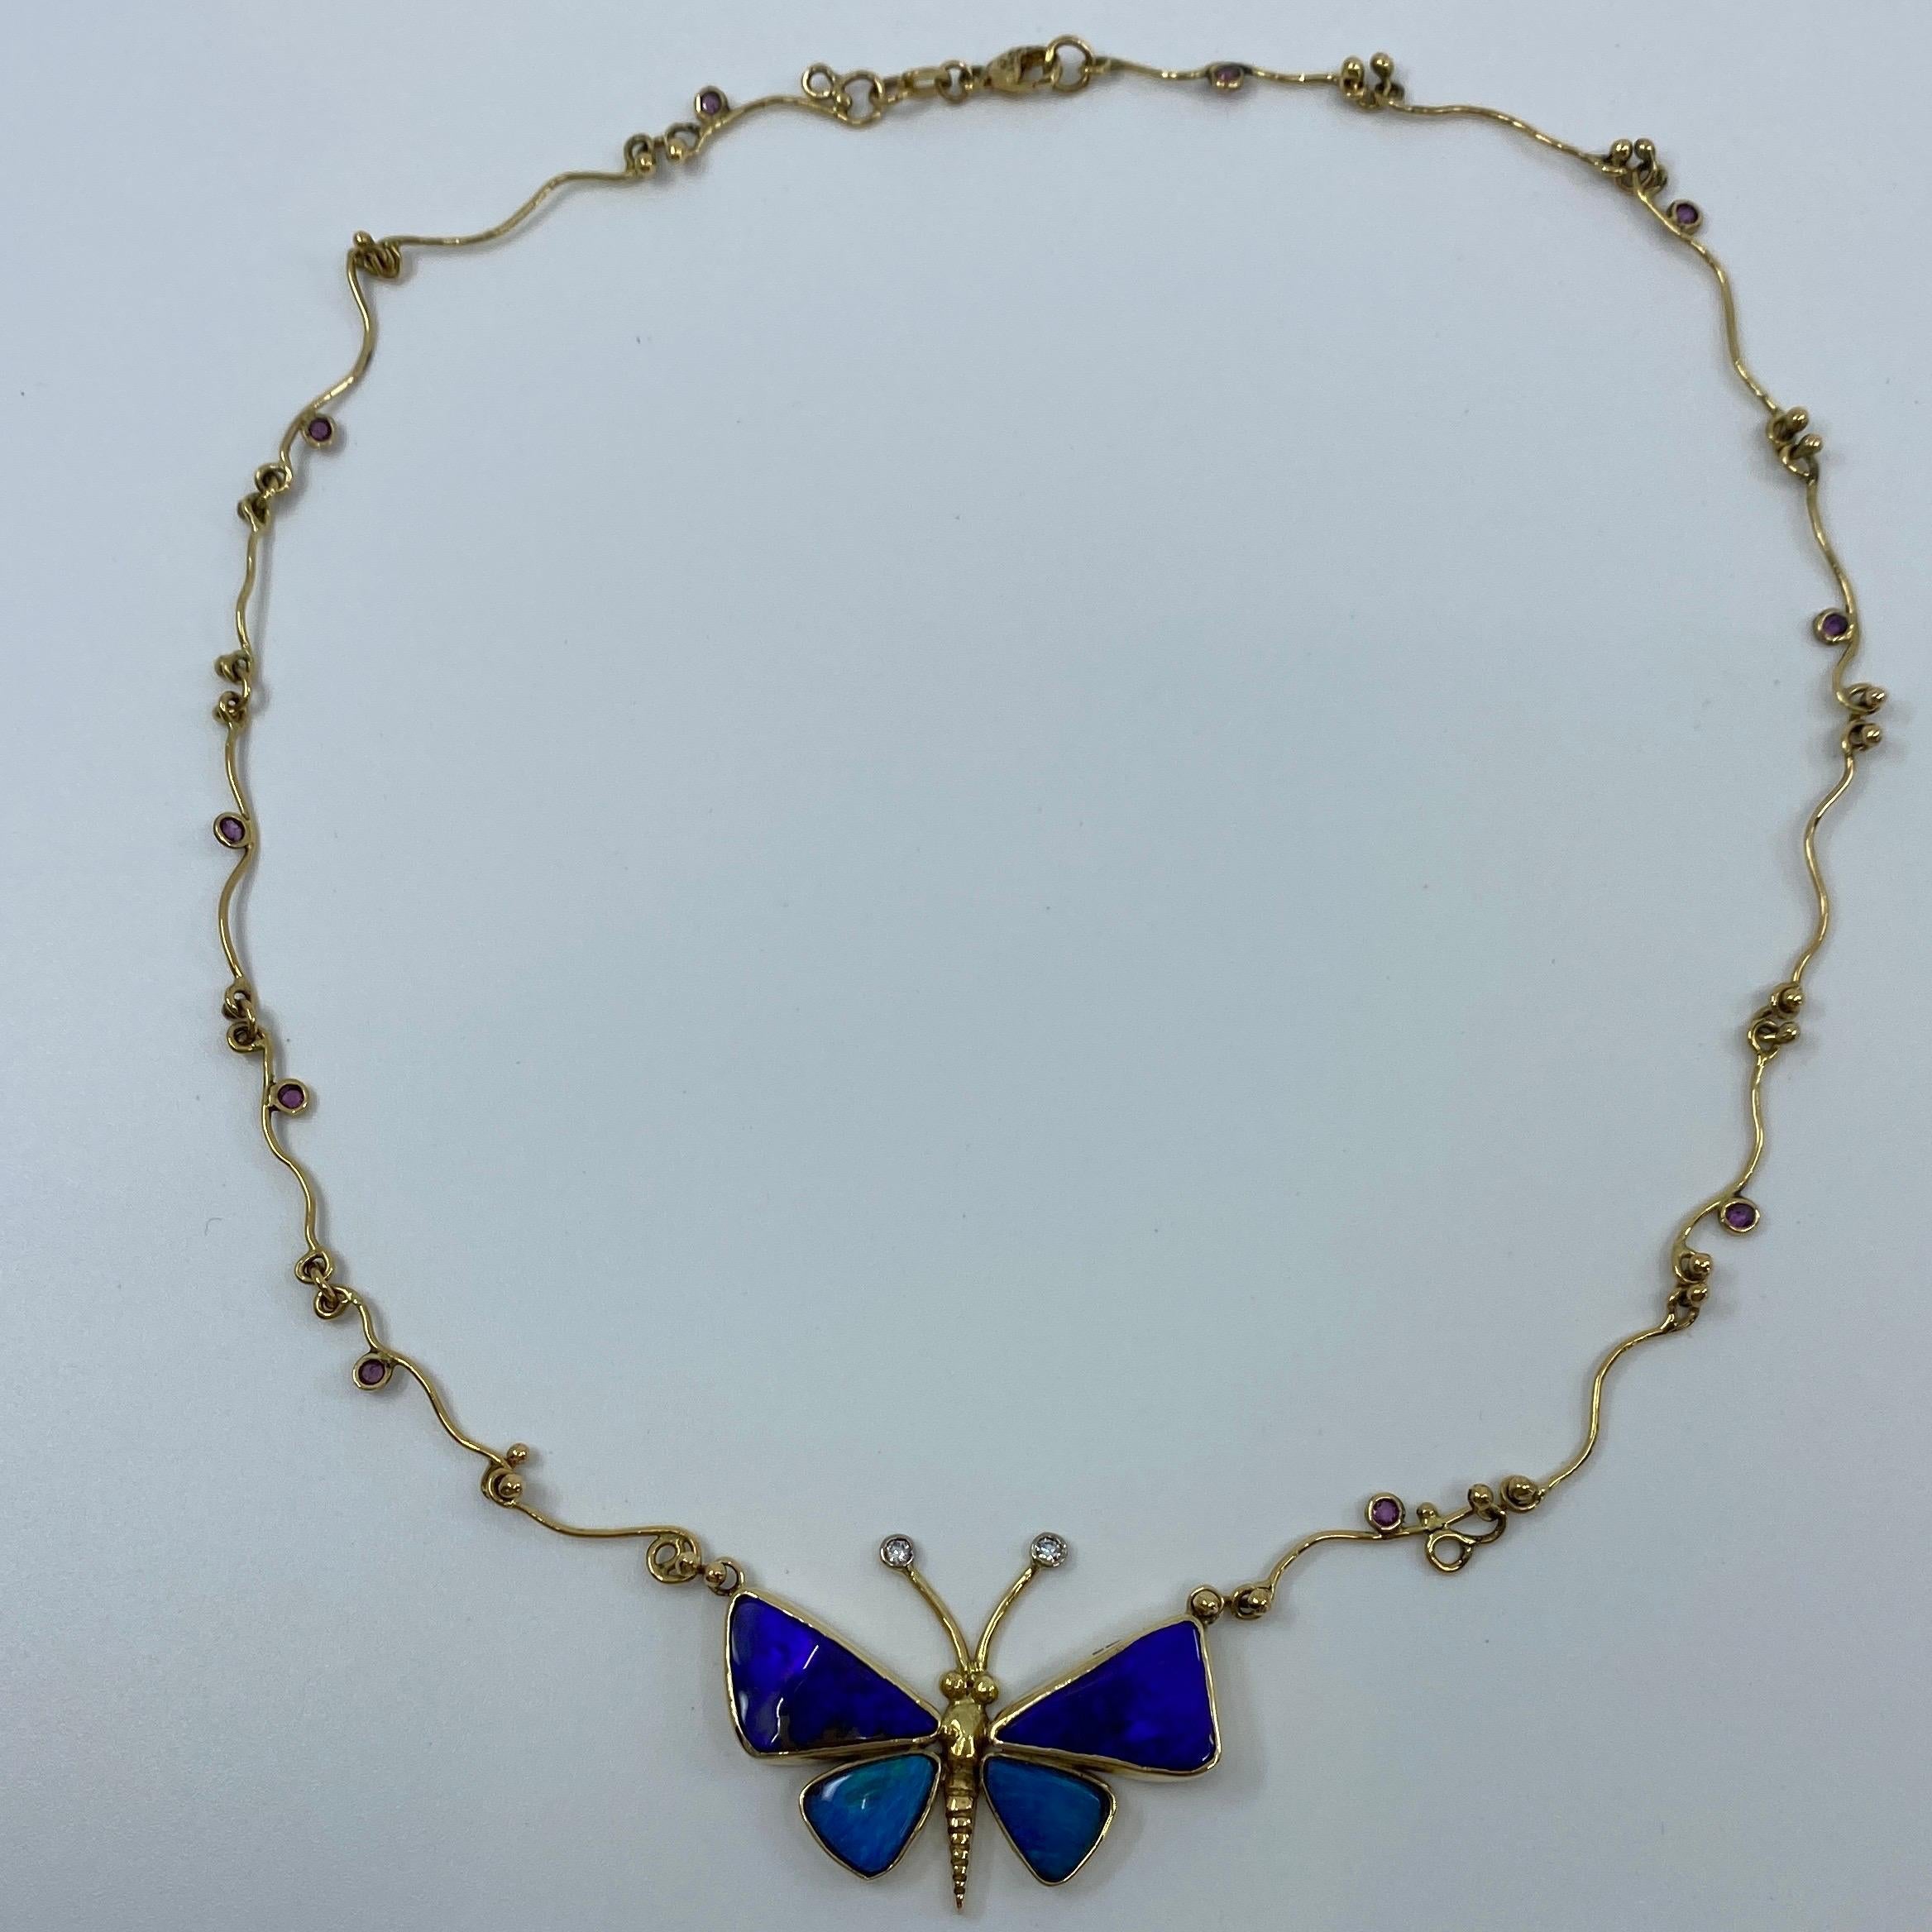 Australian Black Opal, Diamond & Sapphire Butterfly Handmade 18k Gold Necklace.

This is a unique handmade necklace with a beautiful butterfly design.

The necklace is completely handmade in 18k yellow gold with 4 specially cut black opals (with